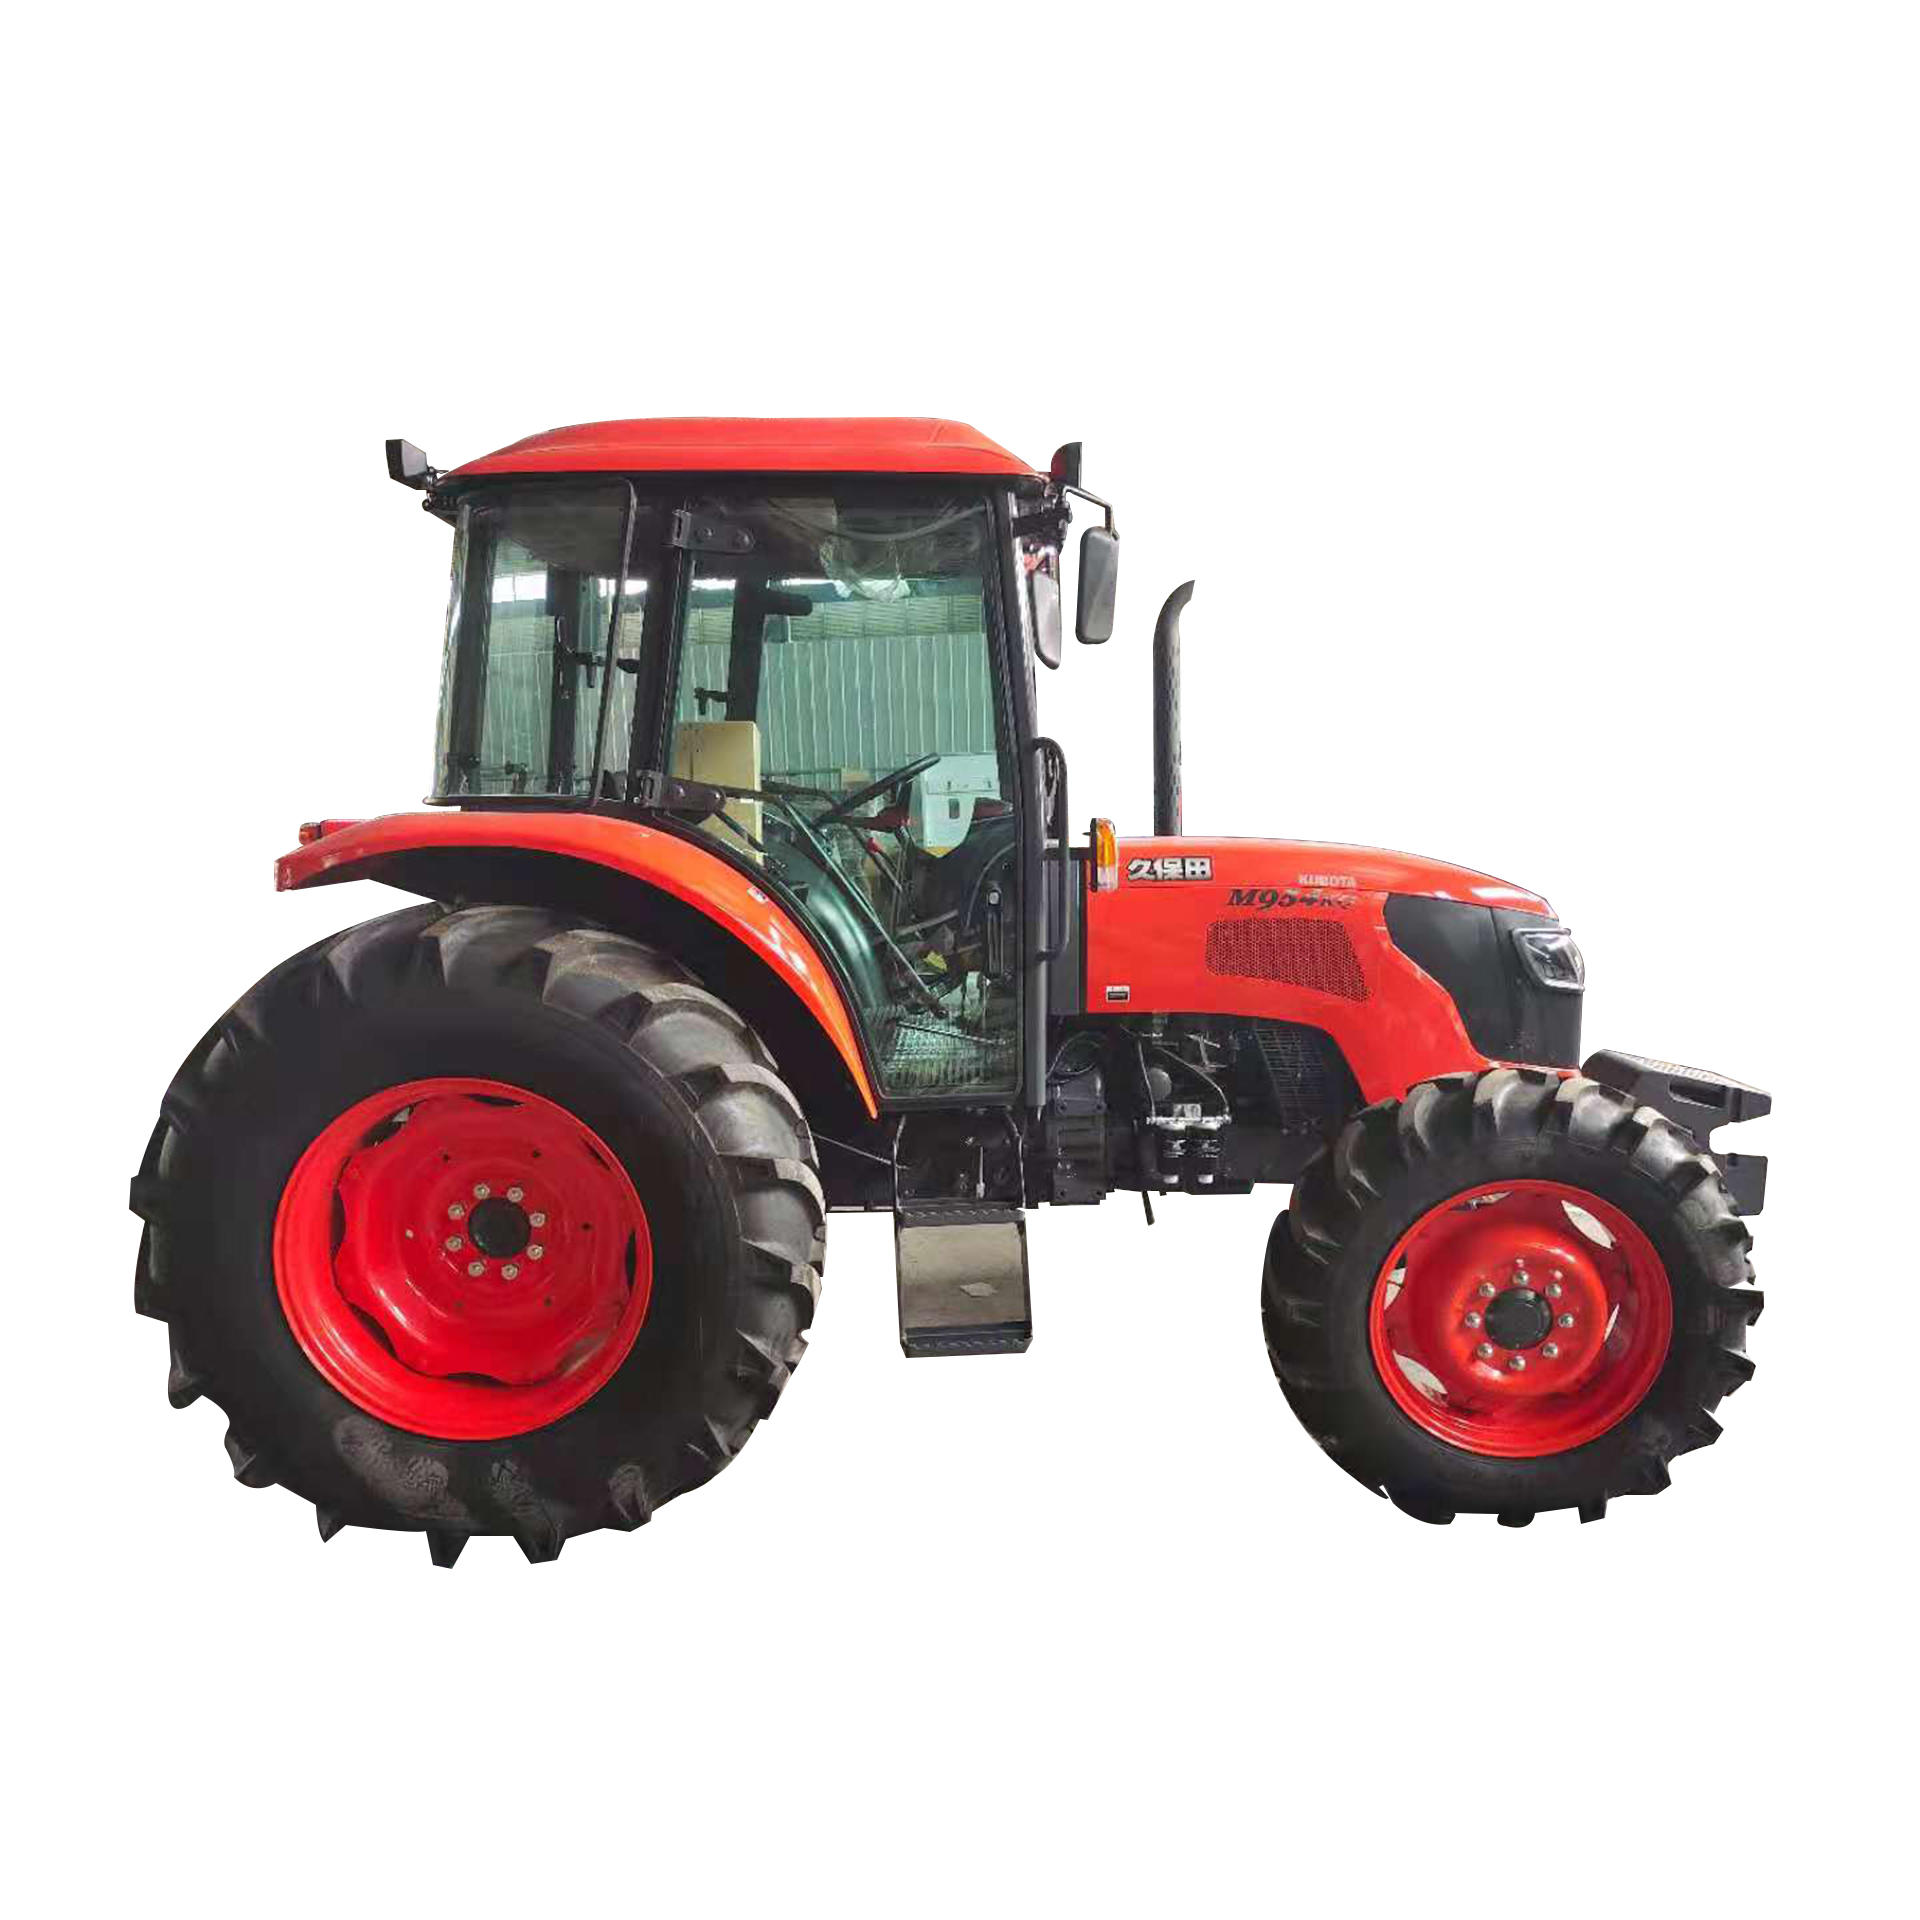 kubota M704KQ vertical water cooled diesel engine Standard air conditioned cab single clutch tractor